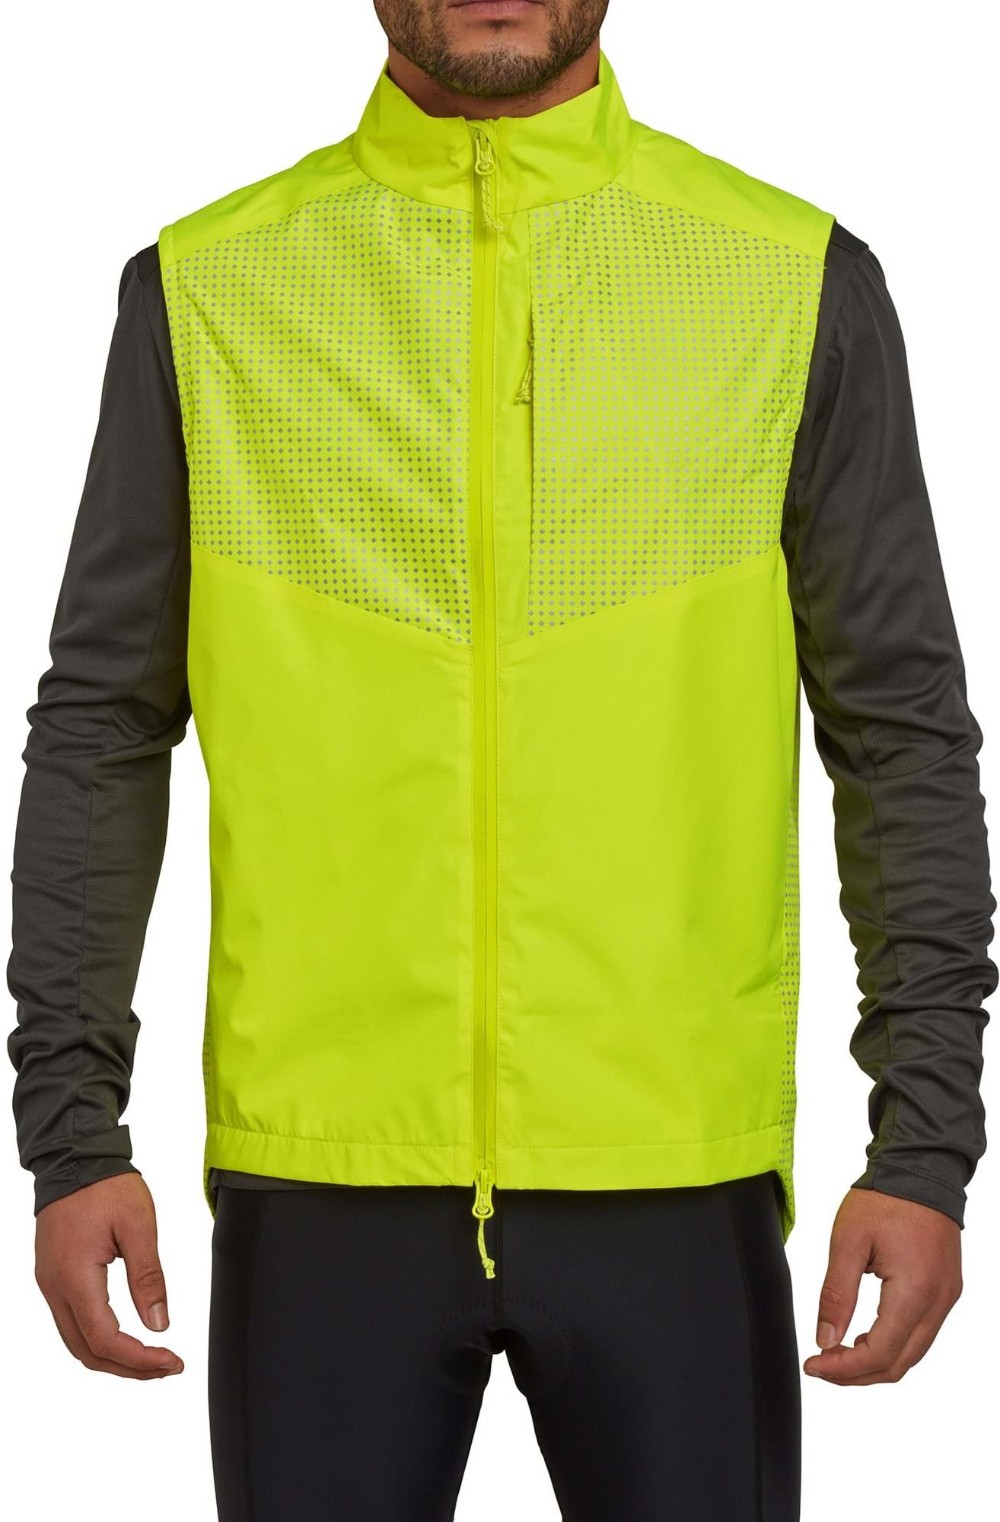 Nightvision Thermal Gilet image 0